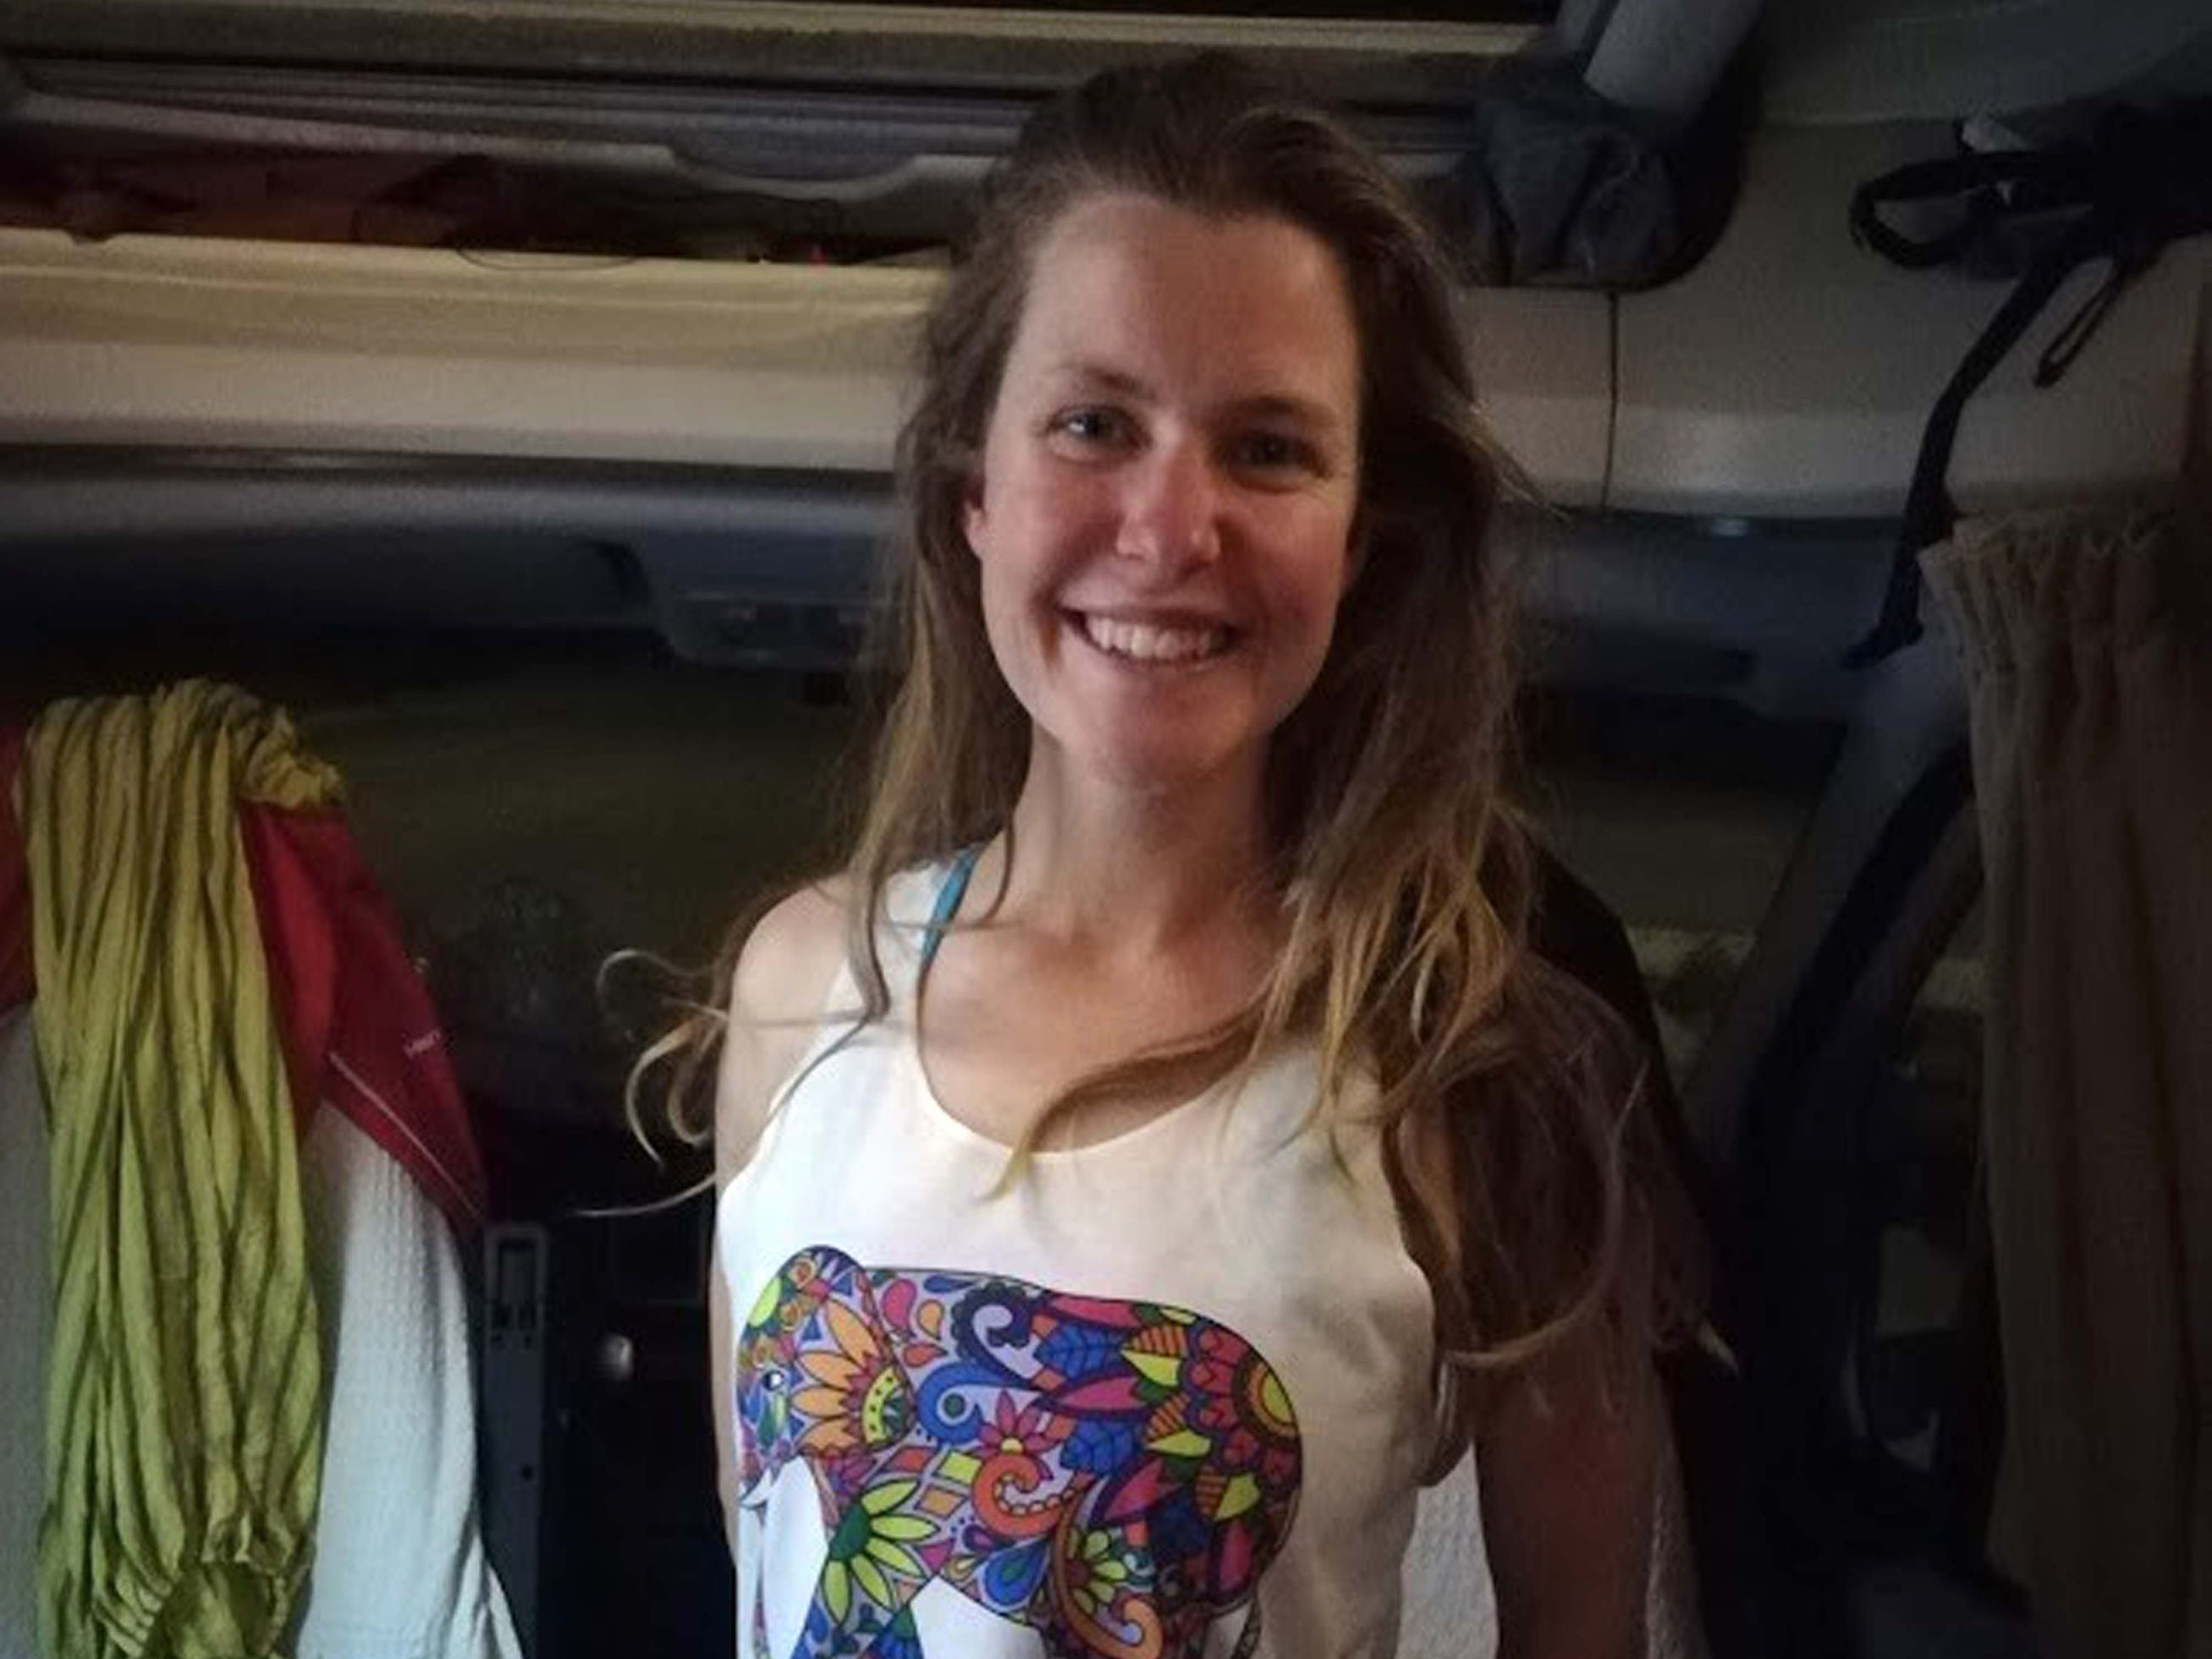 Esther Dingley, 37, went missing while hiking in the Pyrenees in November 2020